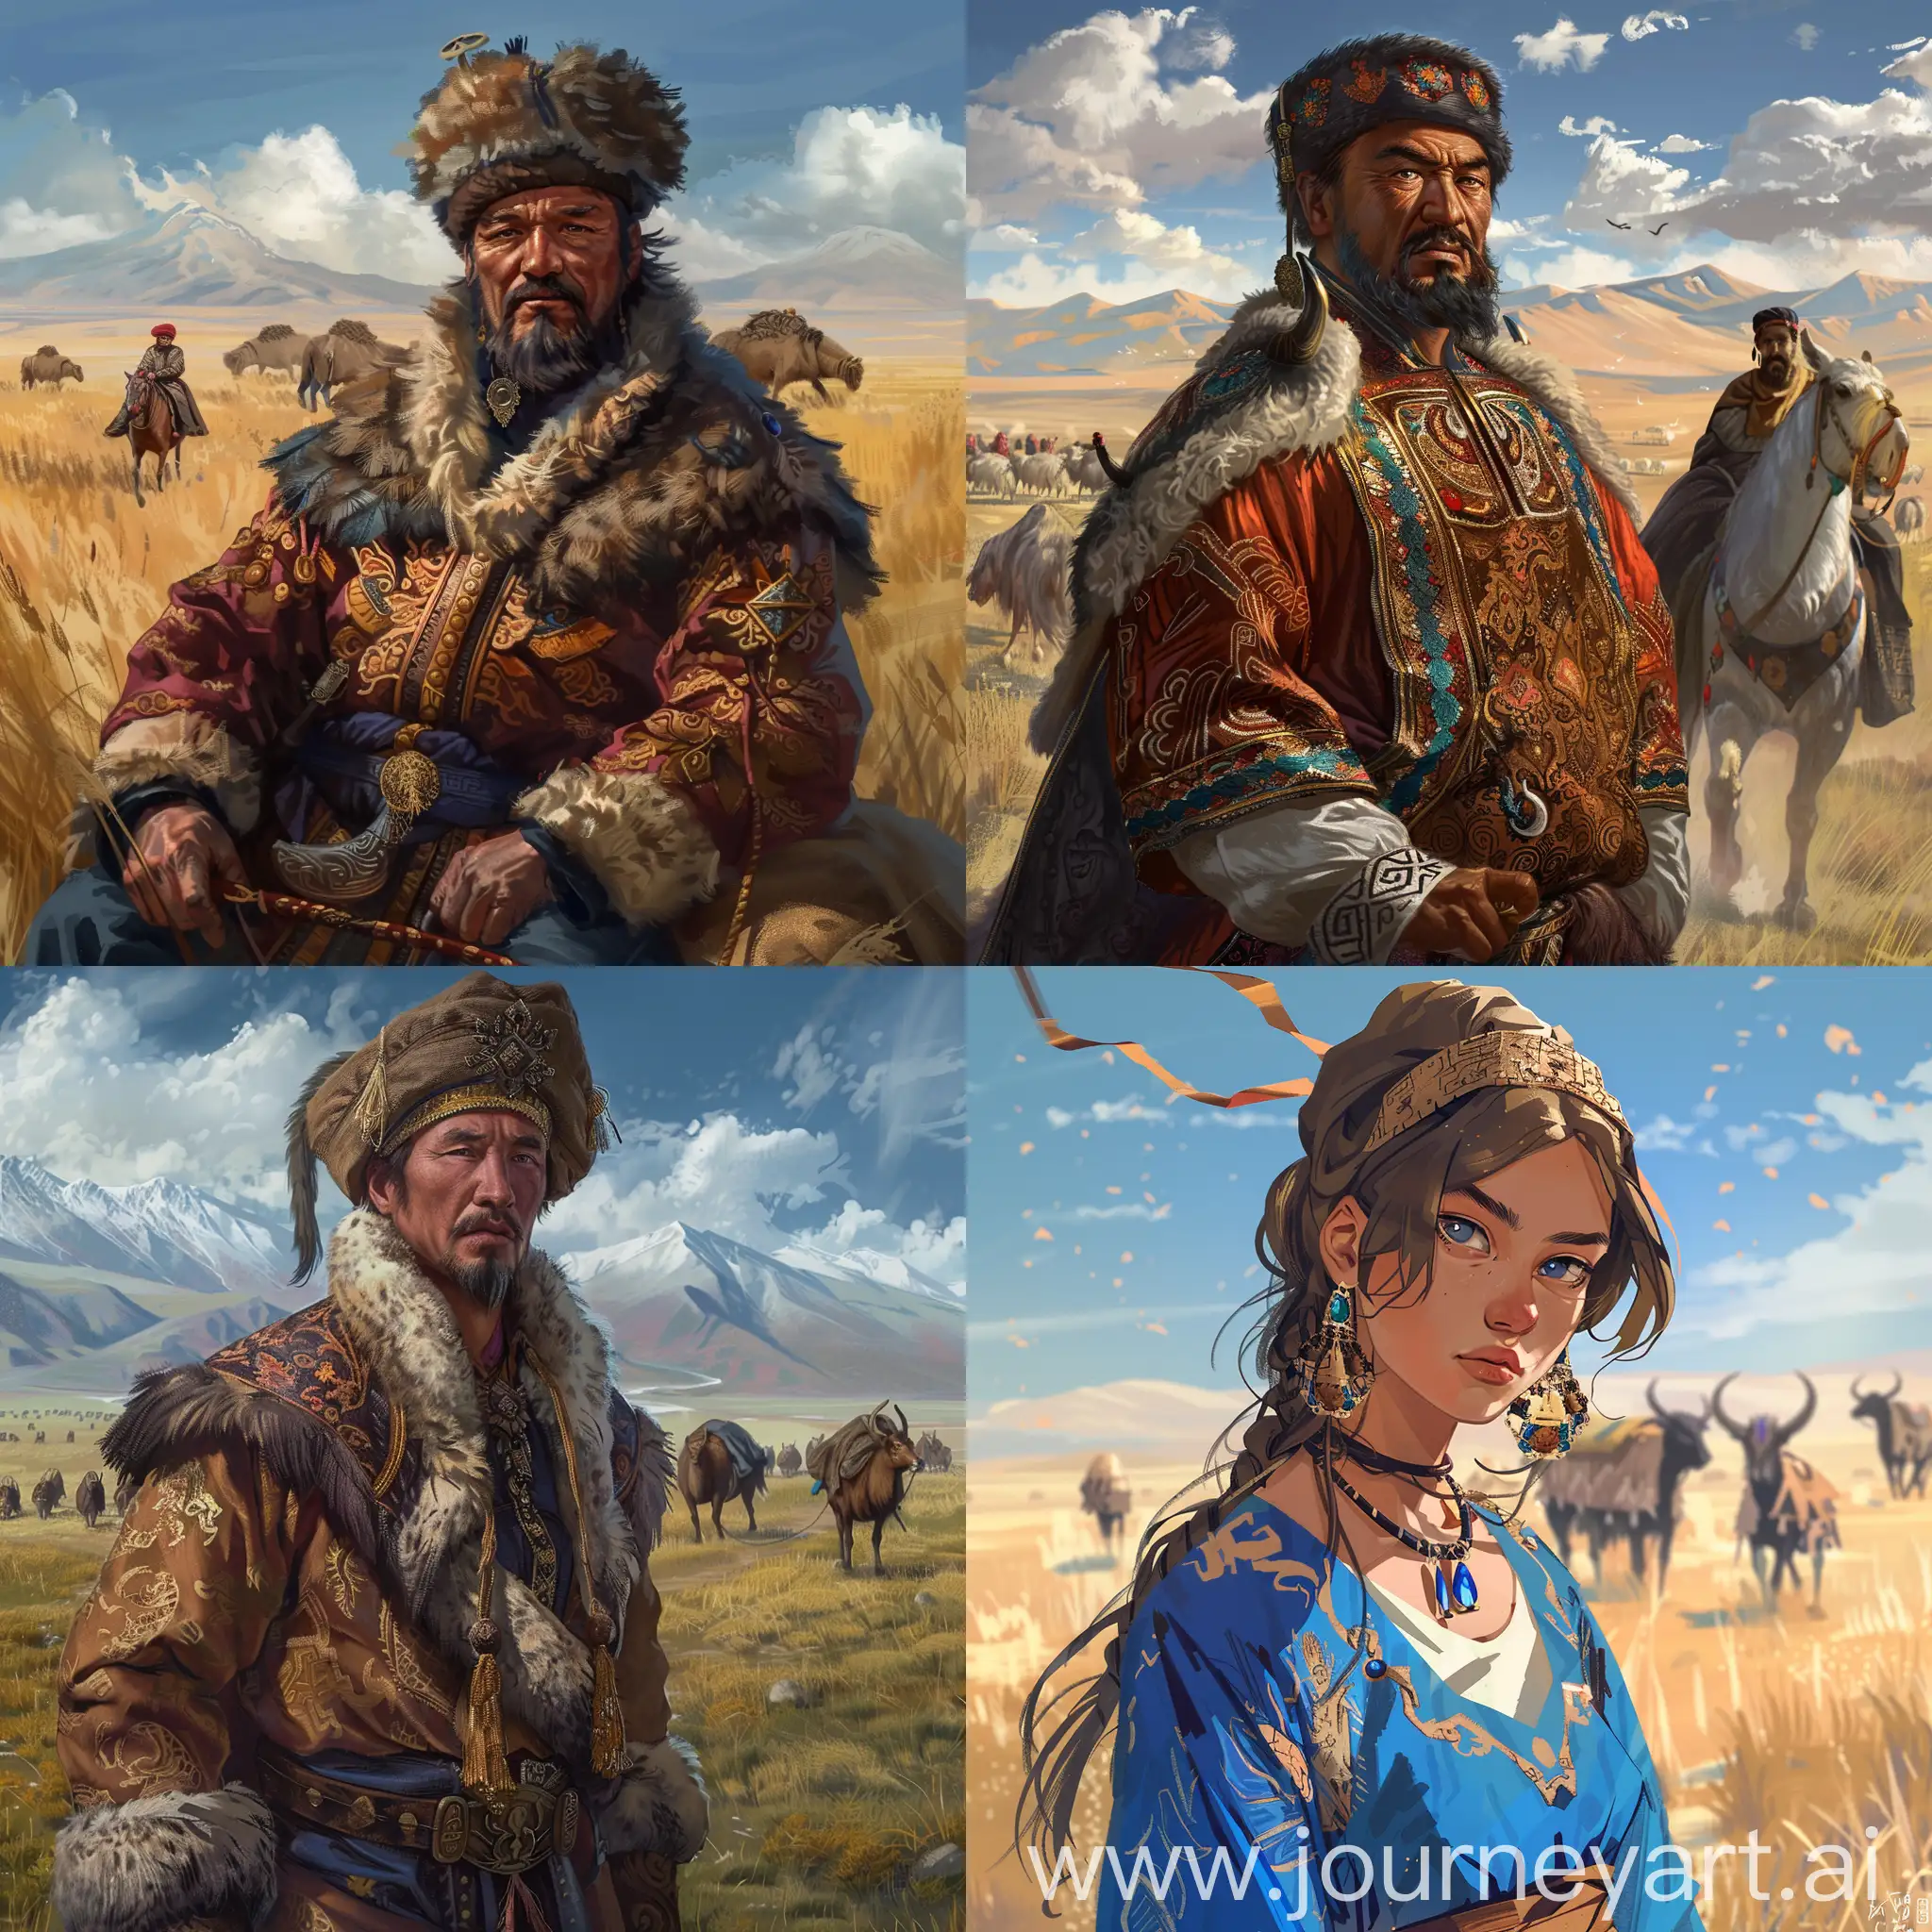 Kazakh-Nomads-and-Traditional-Costume-in-Digital-Art